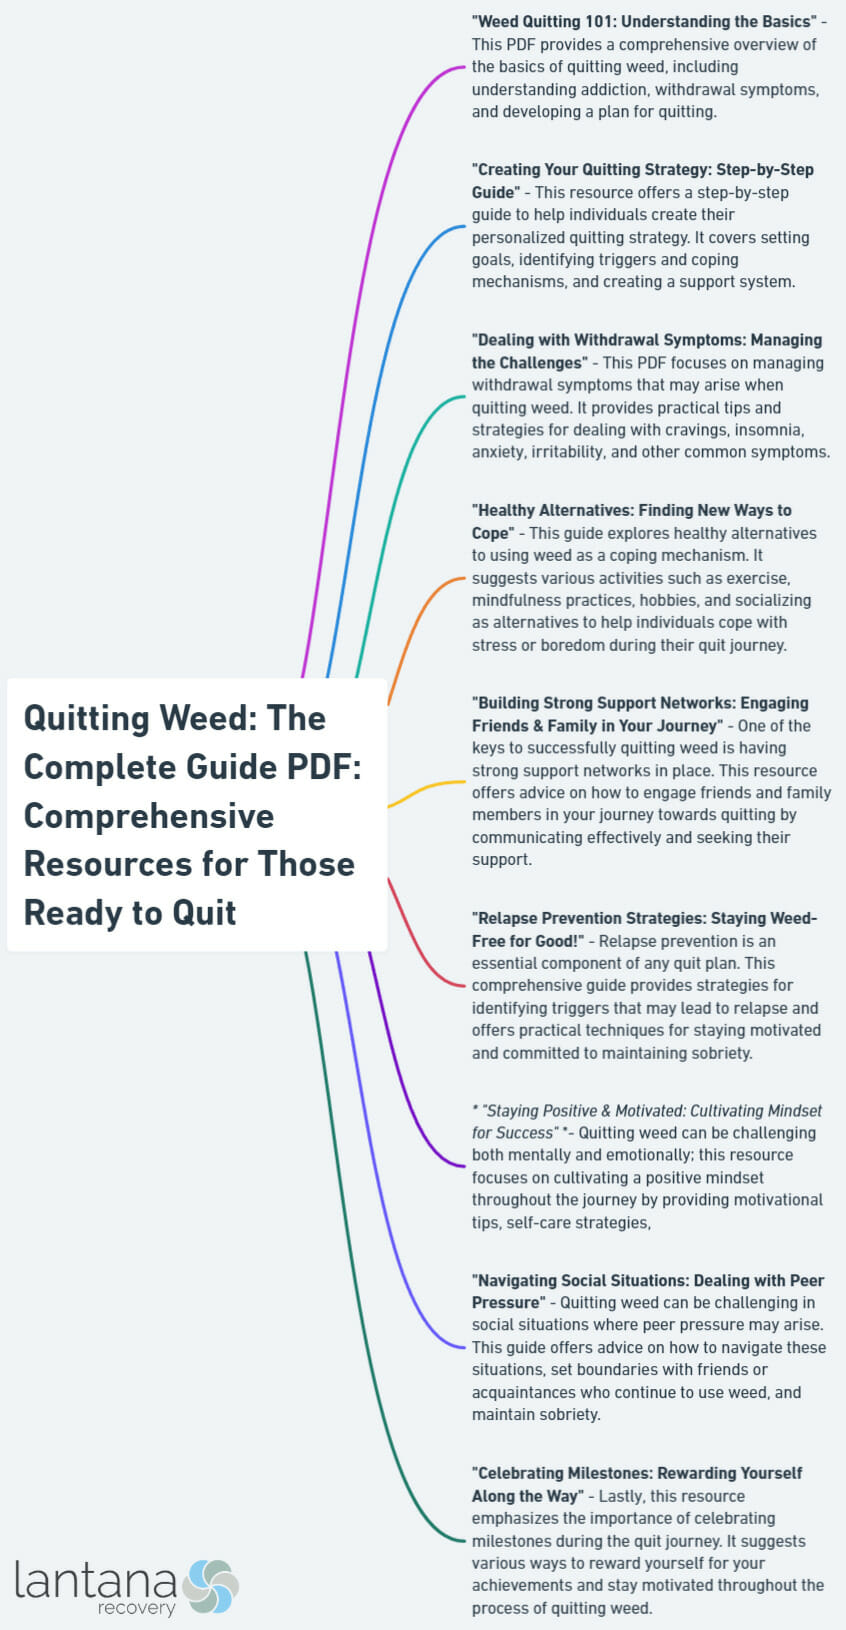 Quitting Weed: The Complete Guide PDF: Comprehensive Resources for Those Ready to Quit